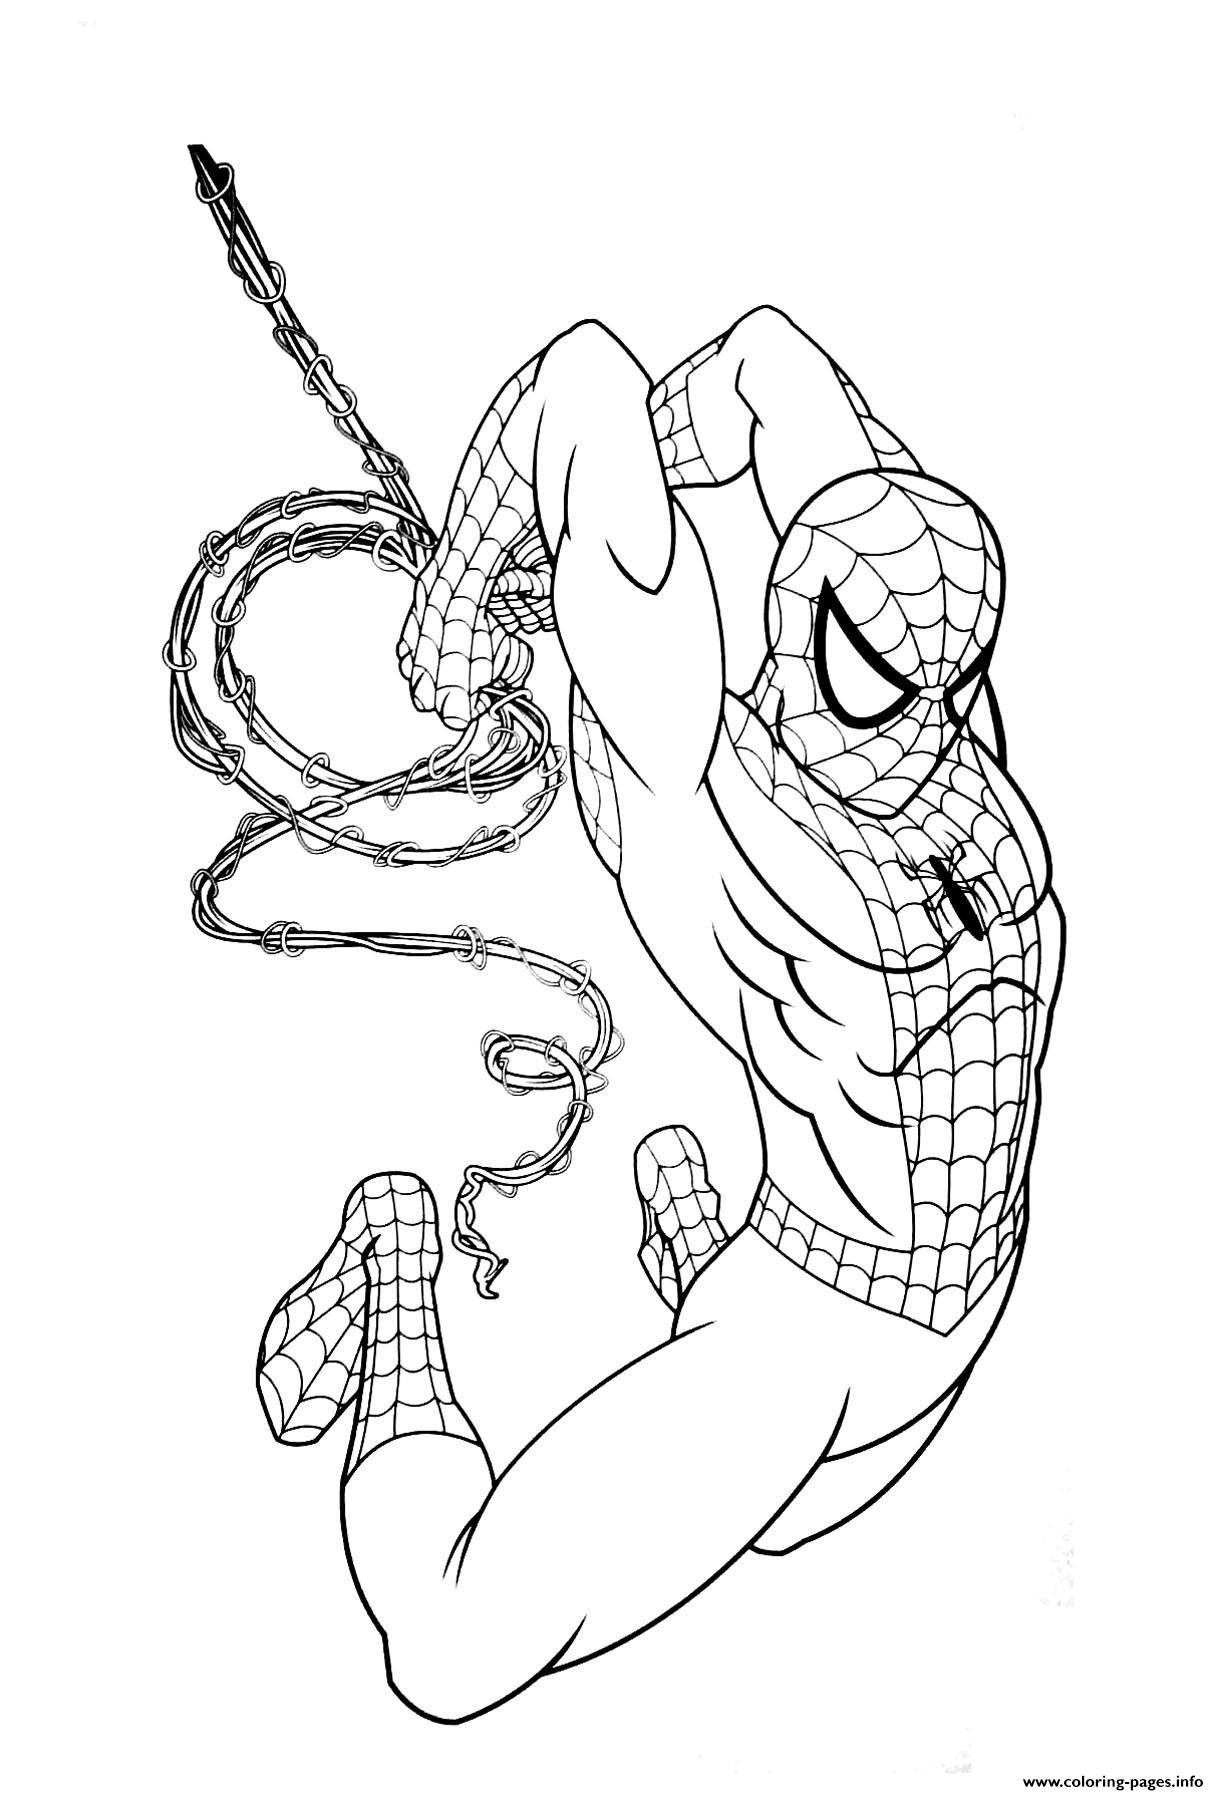 Avengers Endgame Spiderman Coloring Pages Printable